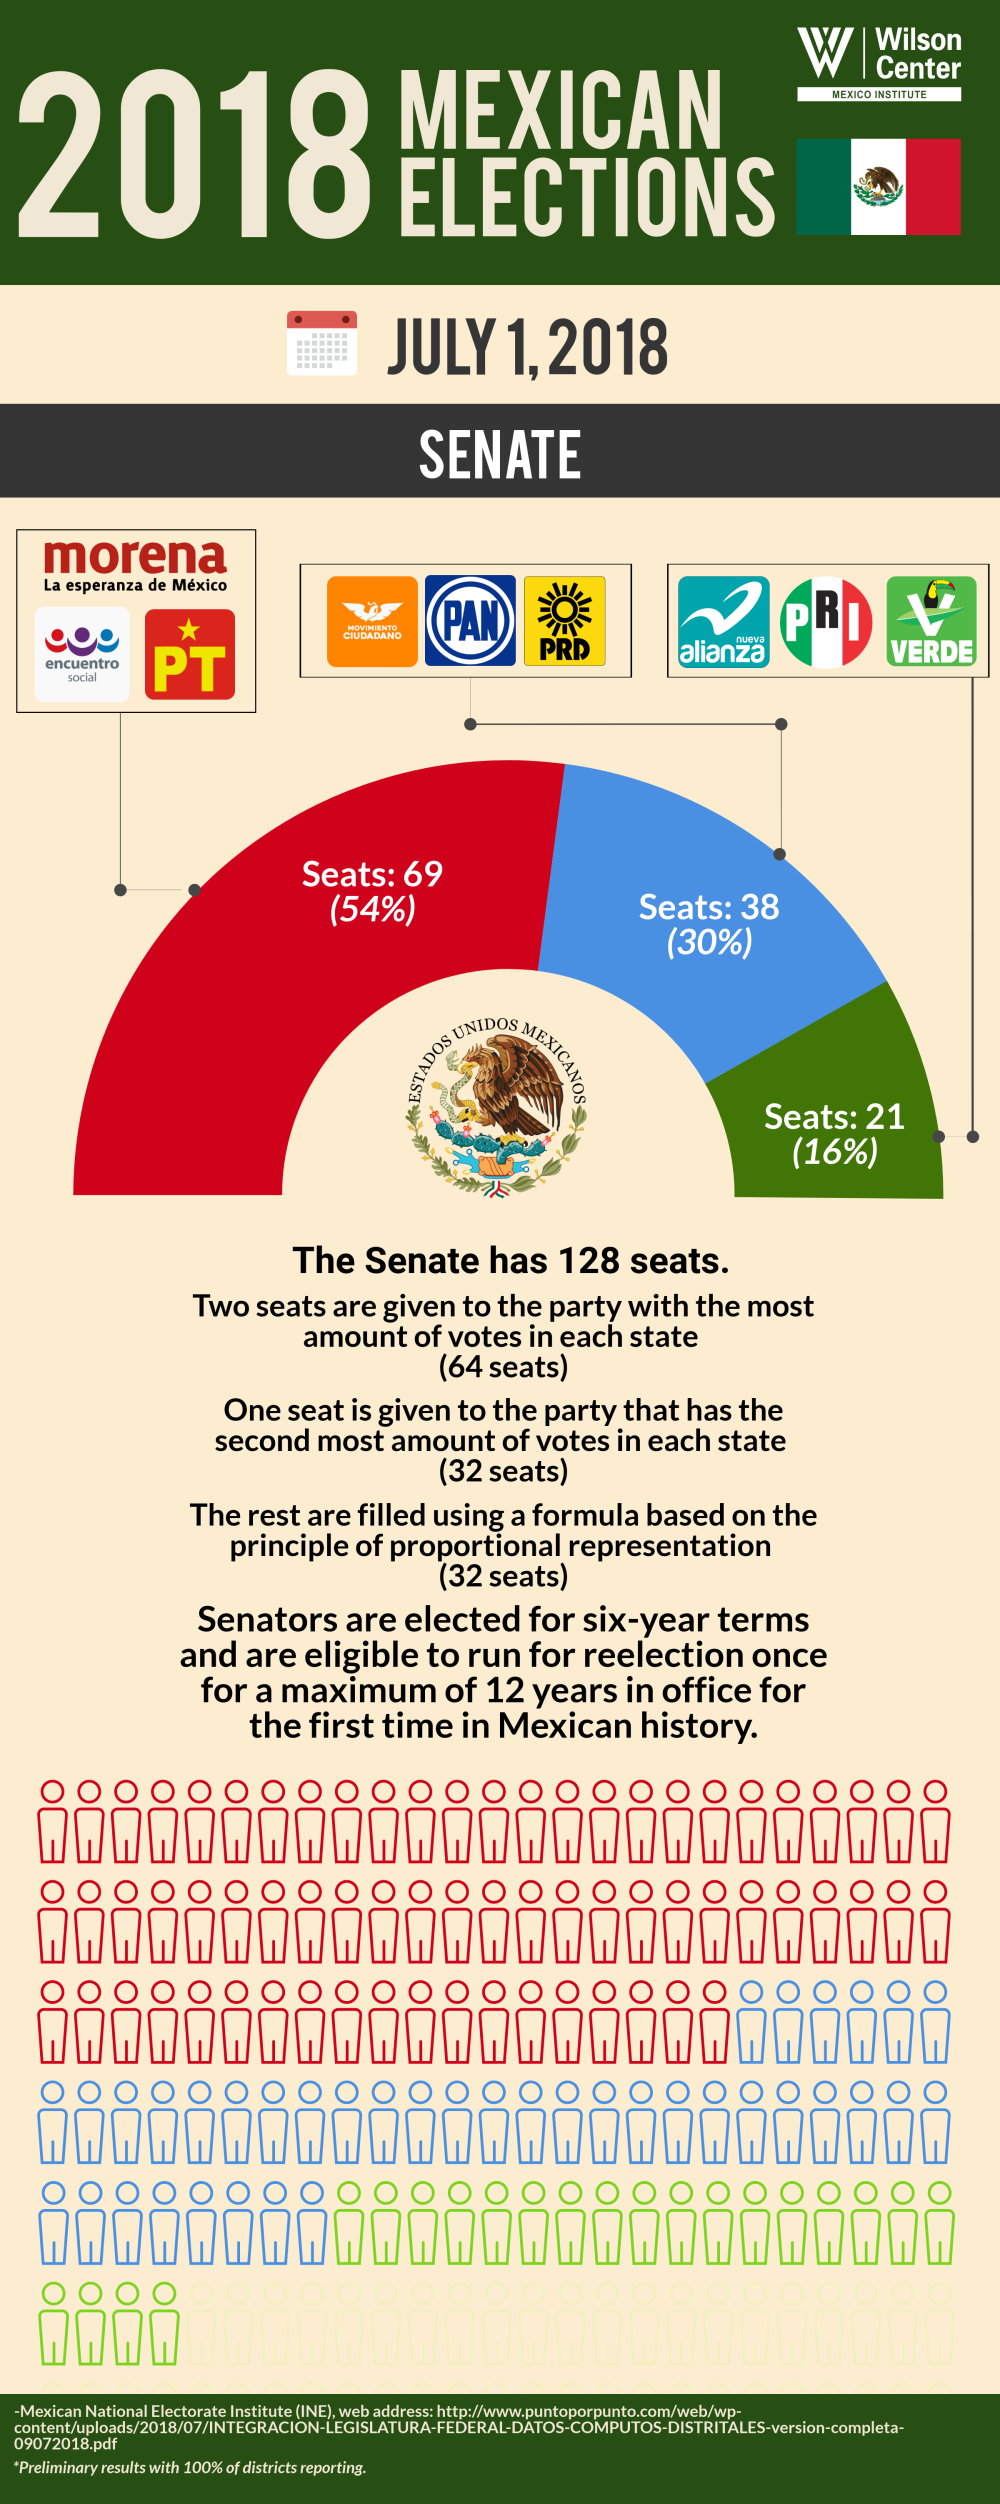 Infographic 2018 Mexican Election Senate Results Wilson Center